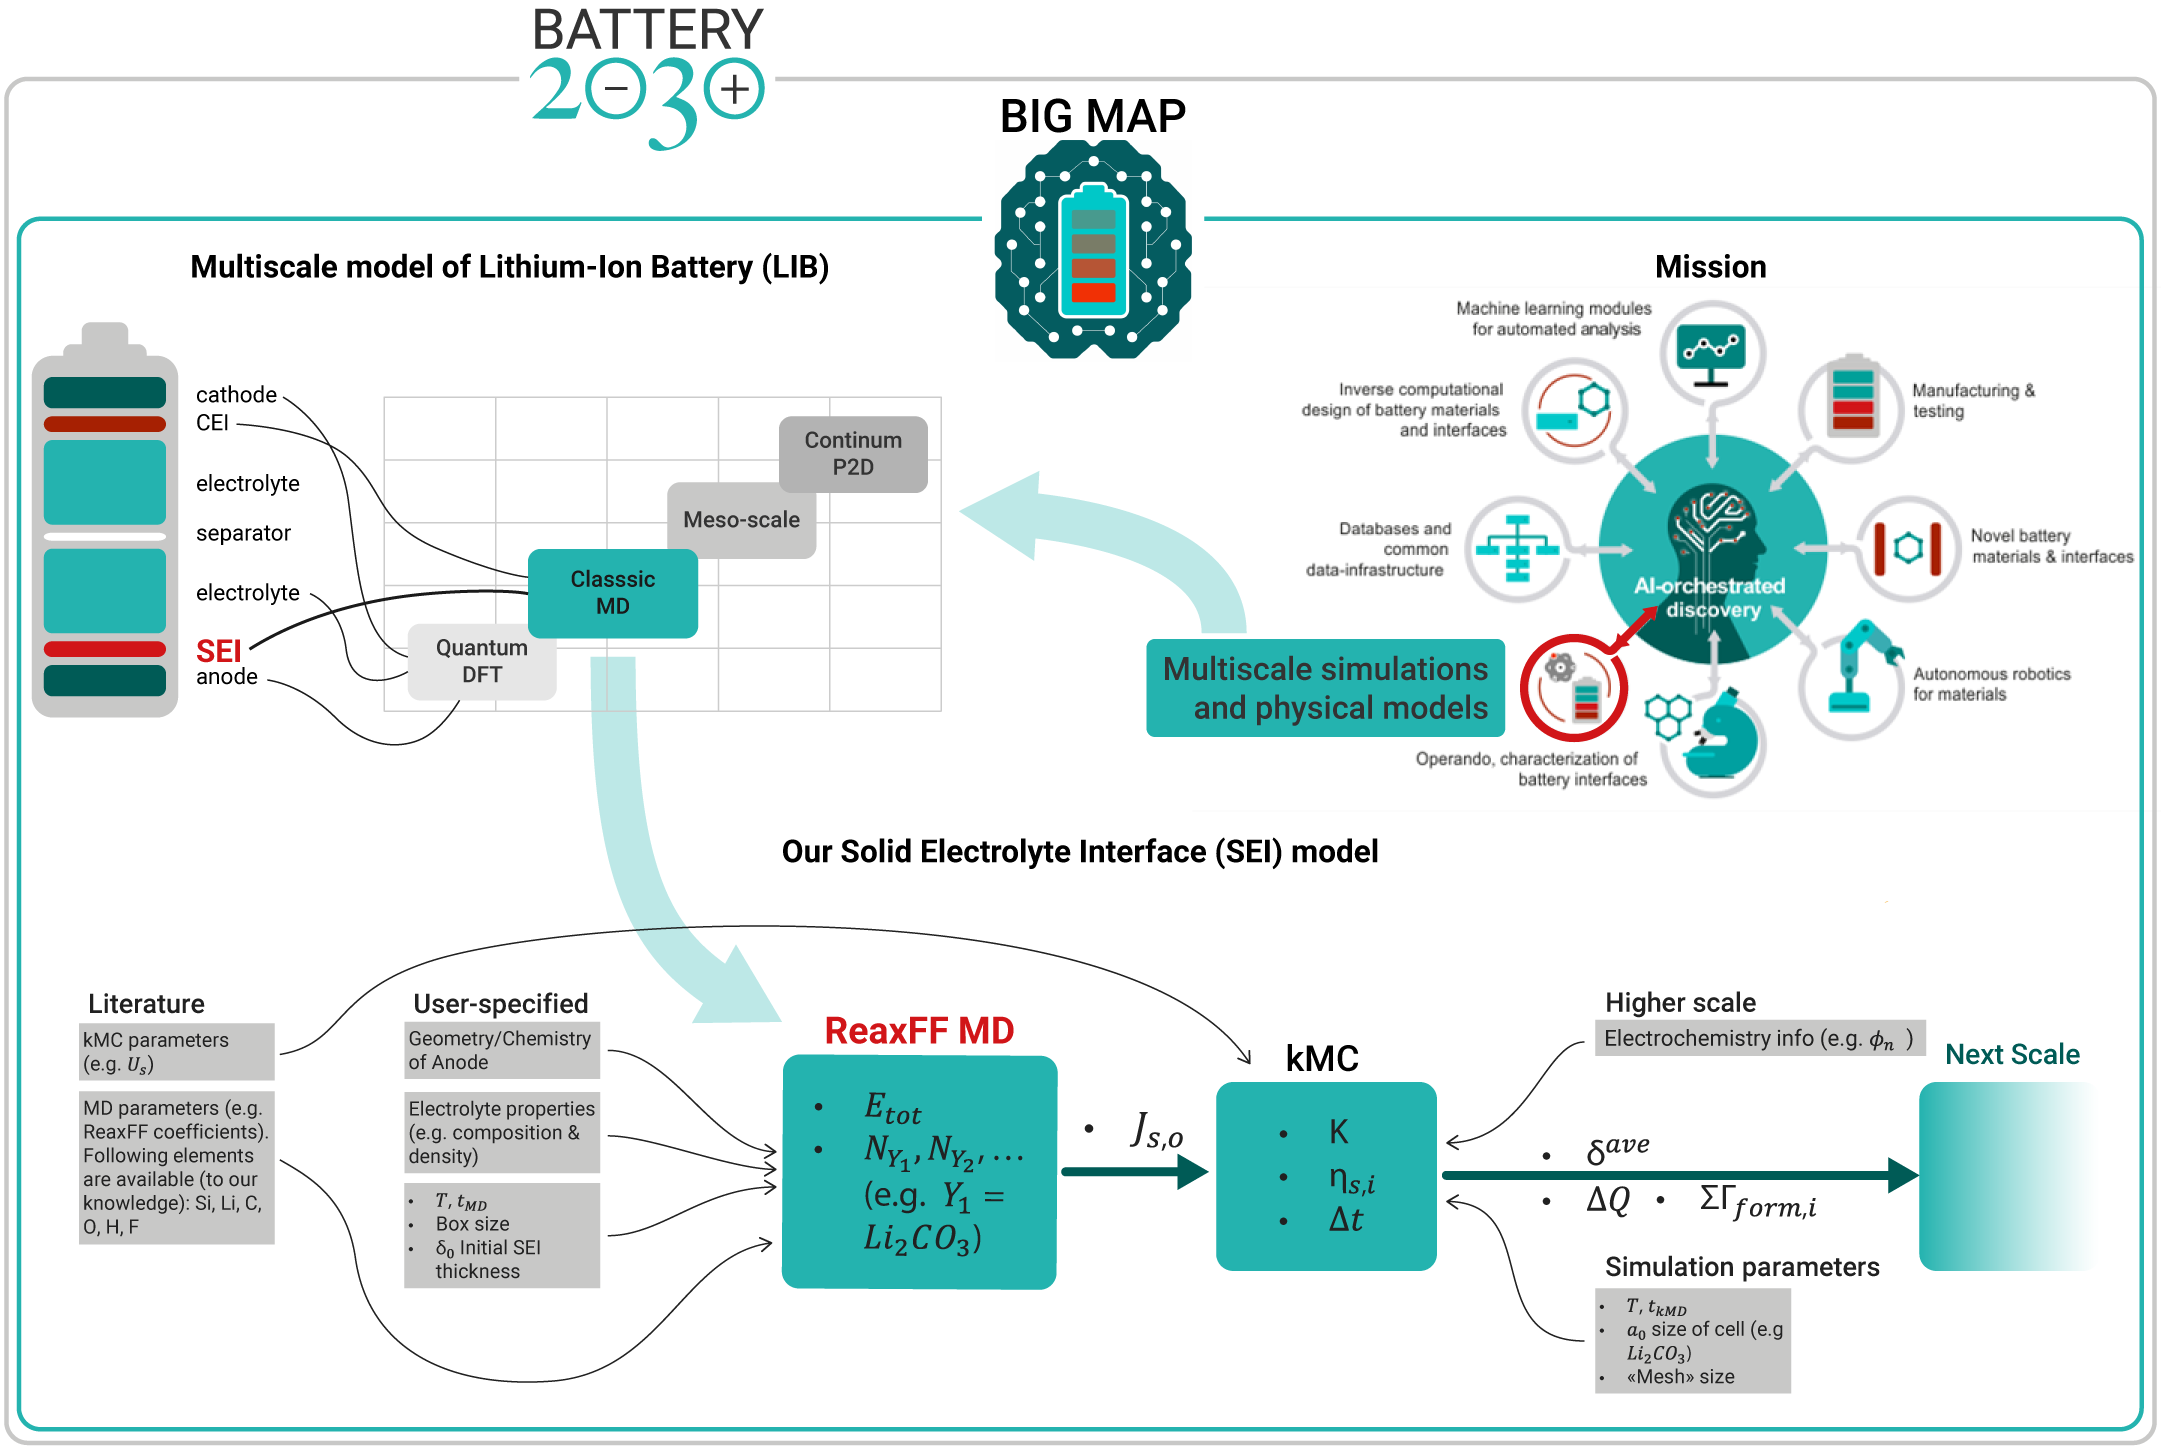 Research framework overview. Going from inside to outside, flowchart overview of our ReaxFF MD project, which aims to build a bottom-up SEI model for lithium-ion batteries as part of the larger multiscale model developed within the BIG-MAP European project. These computational activities are part of the long-term Battery 2030+ initiative.